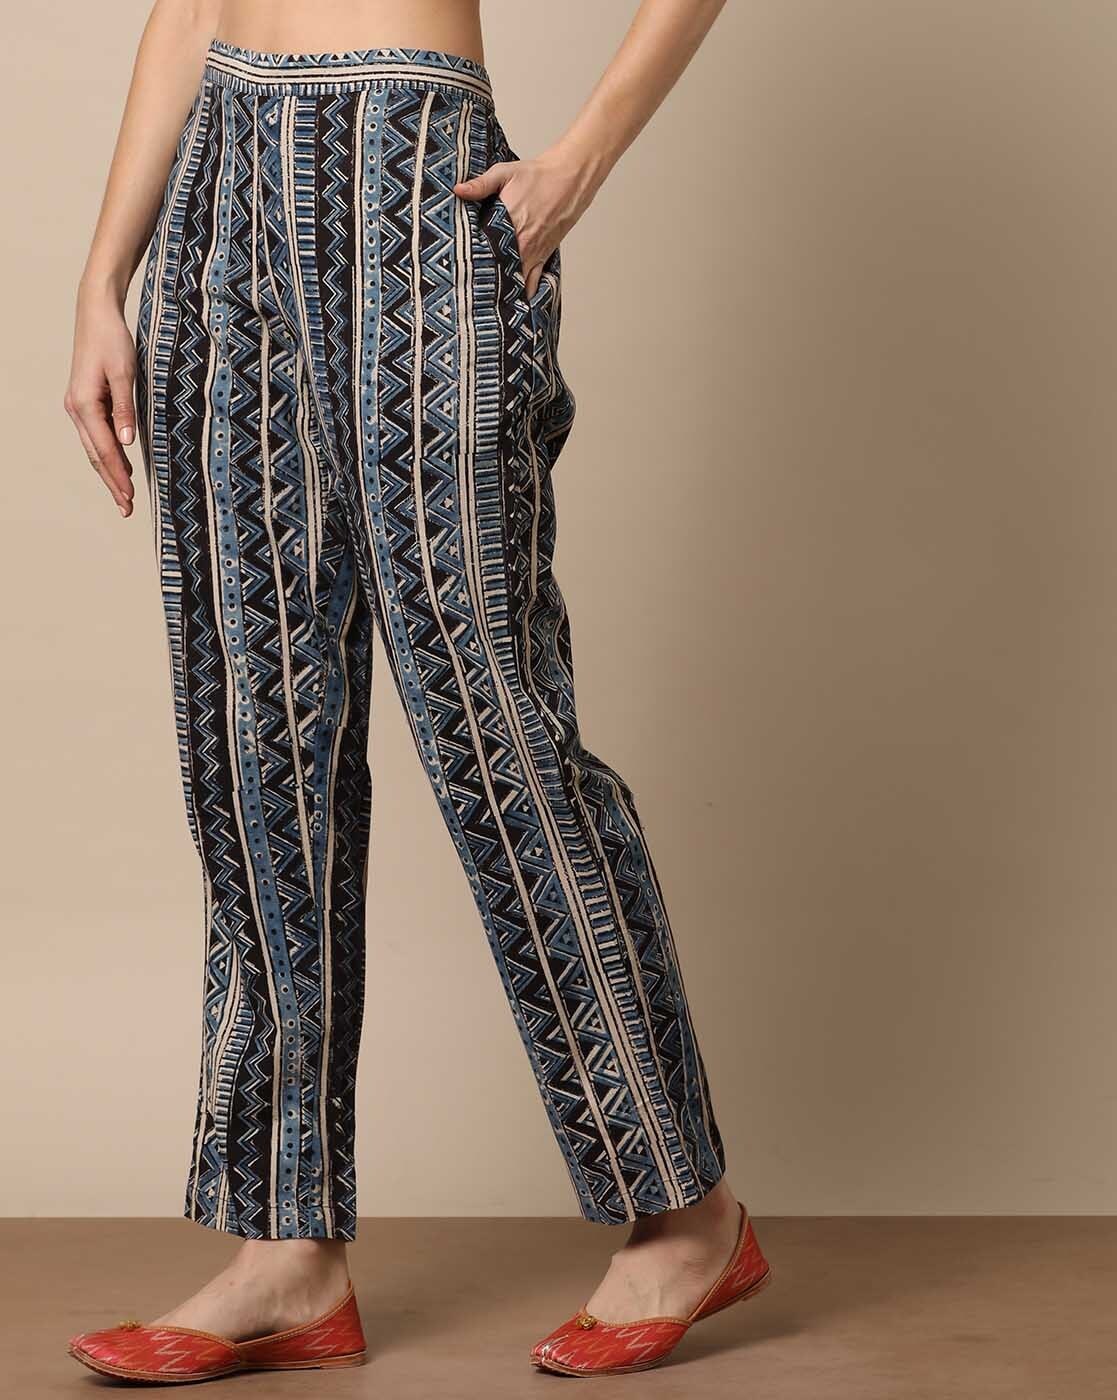 Discover 74+ printed pants for ladies online